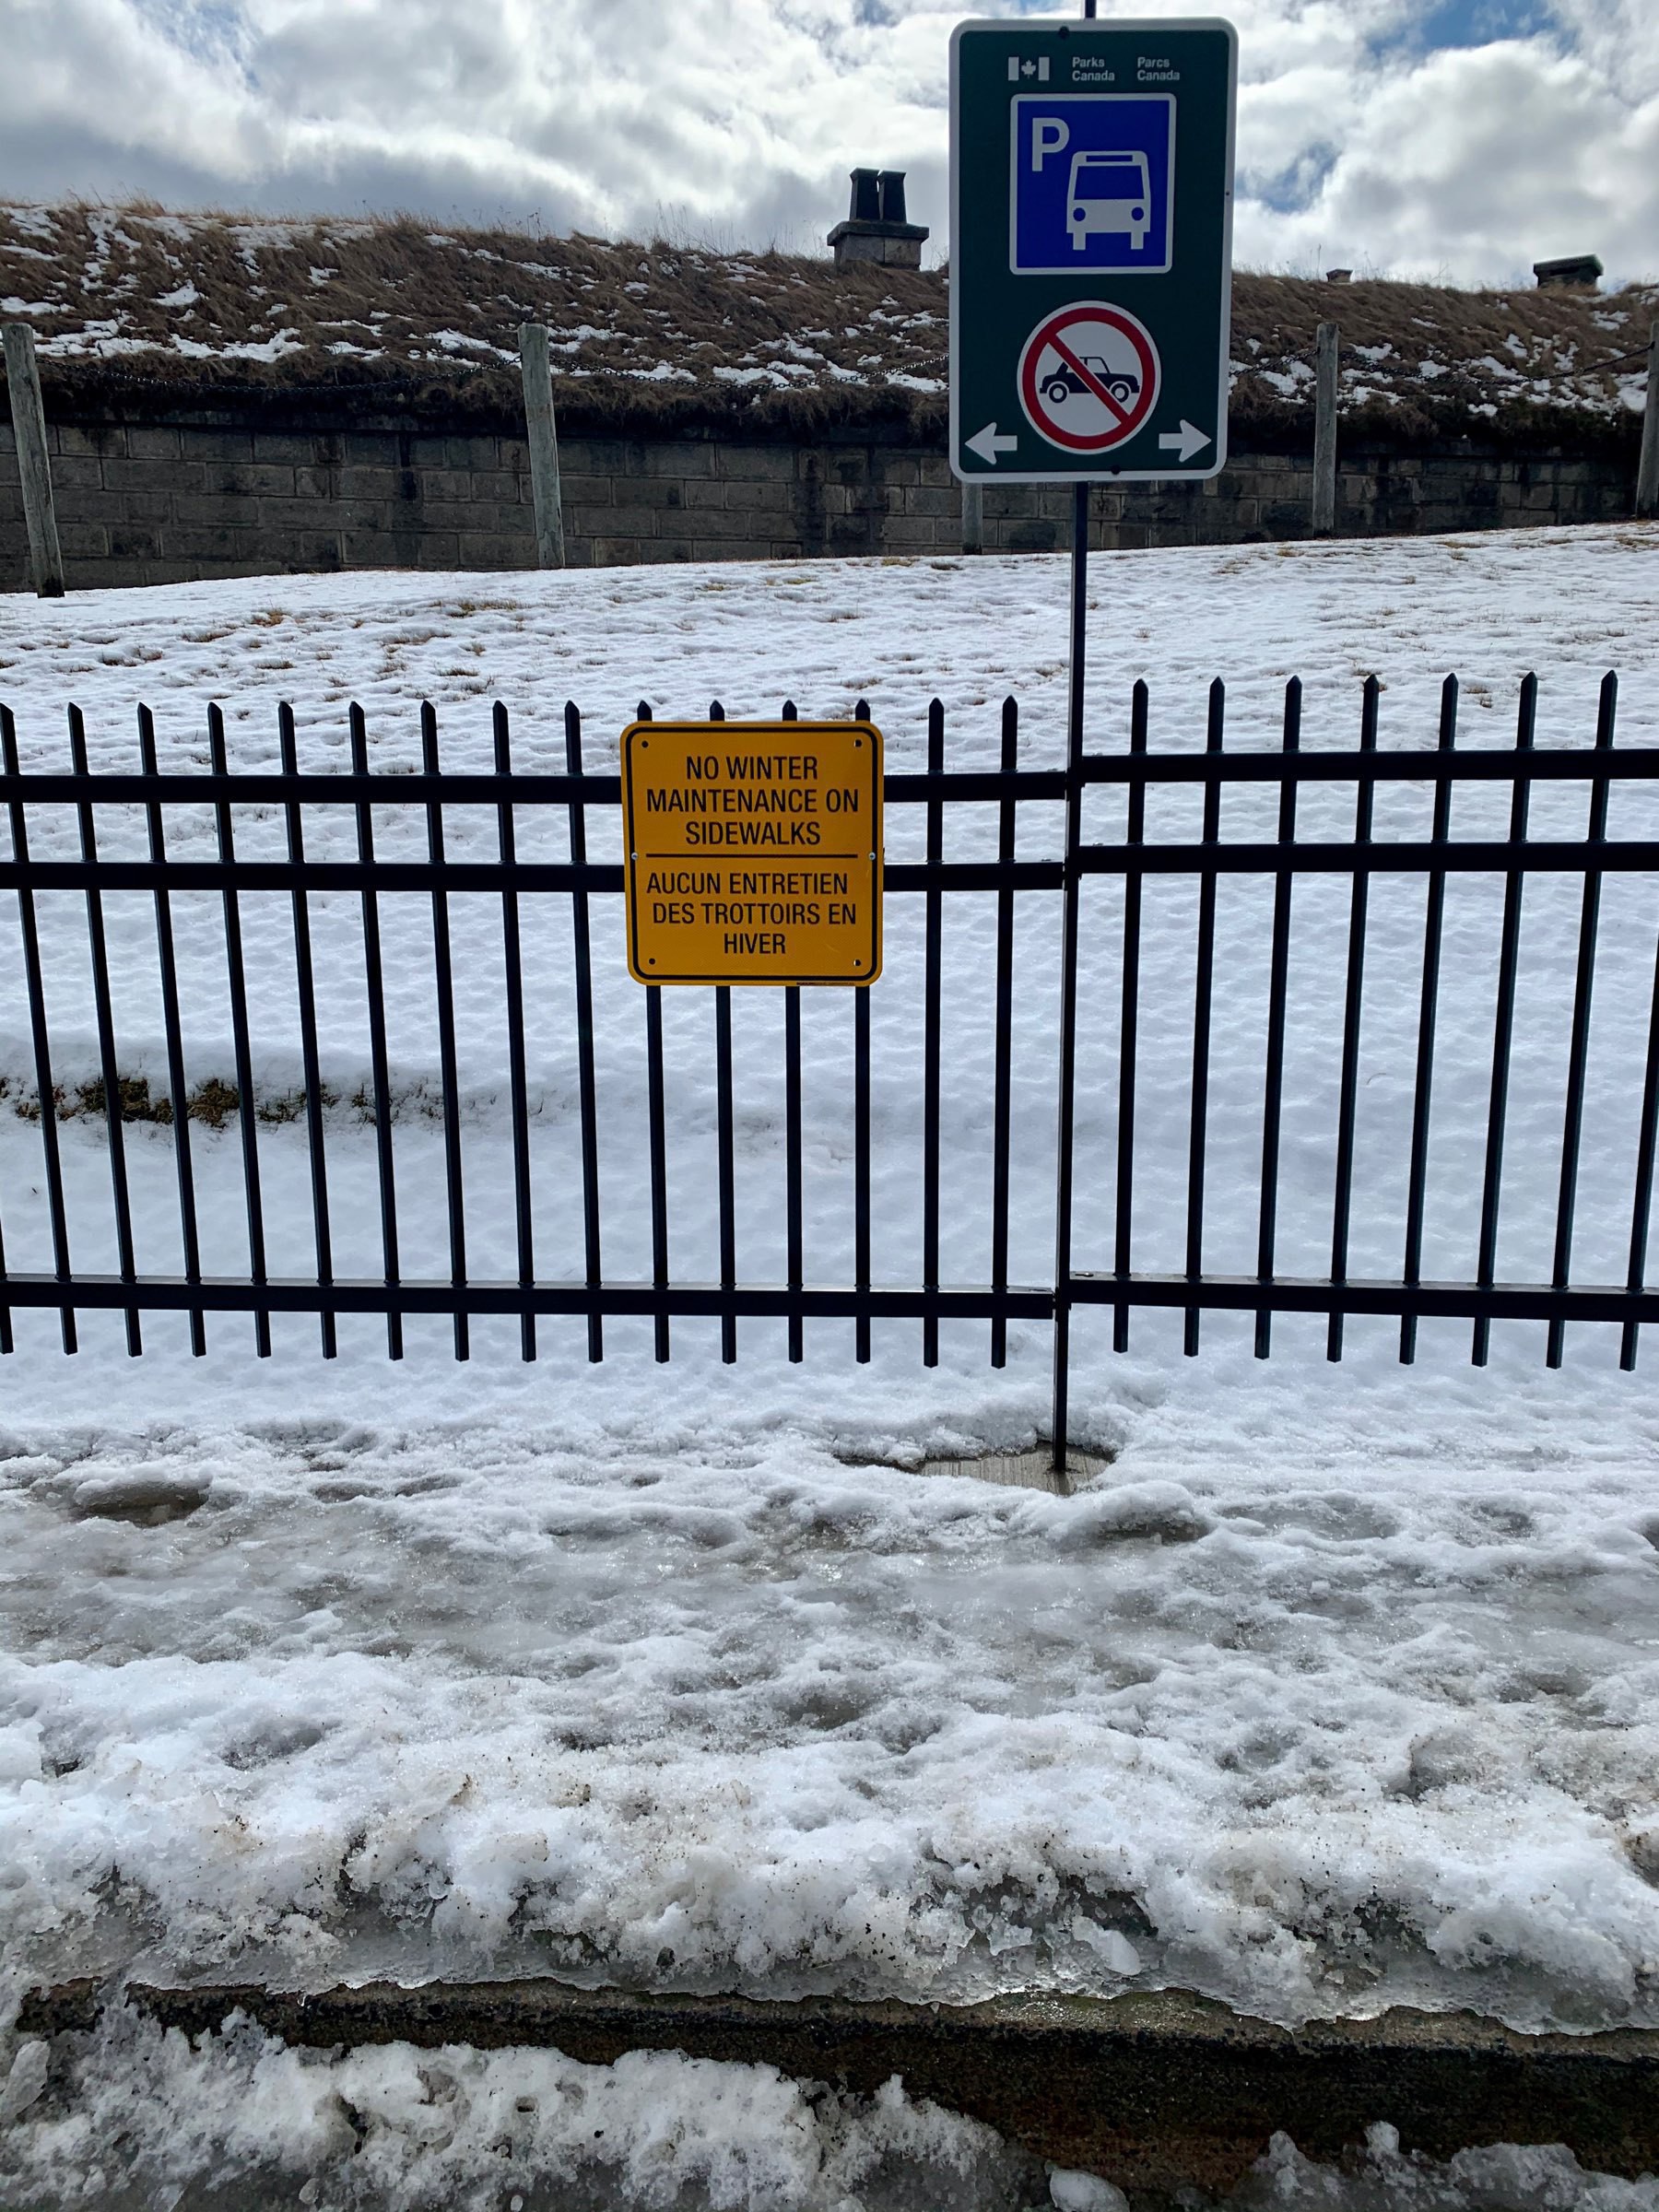 A snow-covered sidewalk next to a sign reading "No winter maintenance on sidewalks."